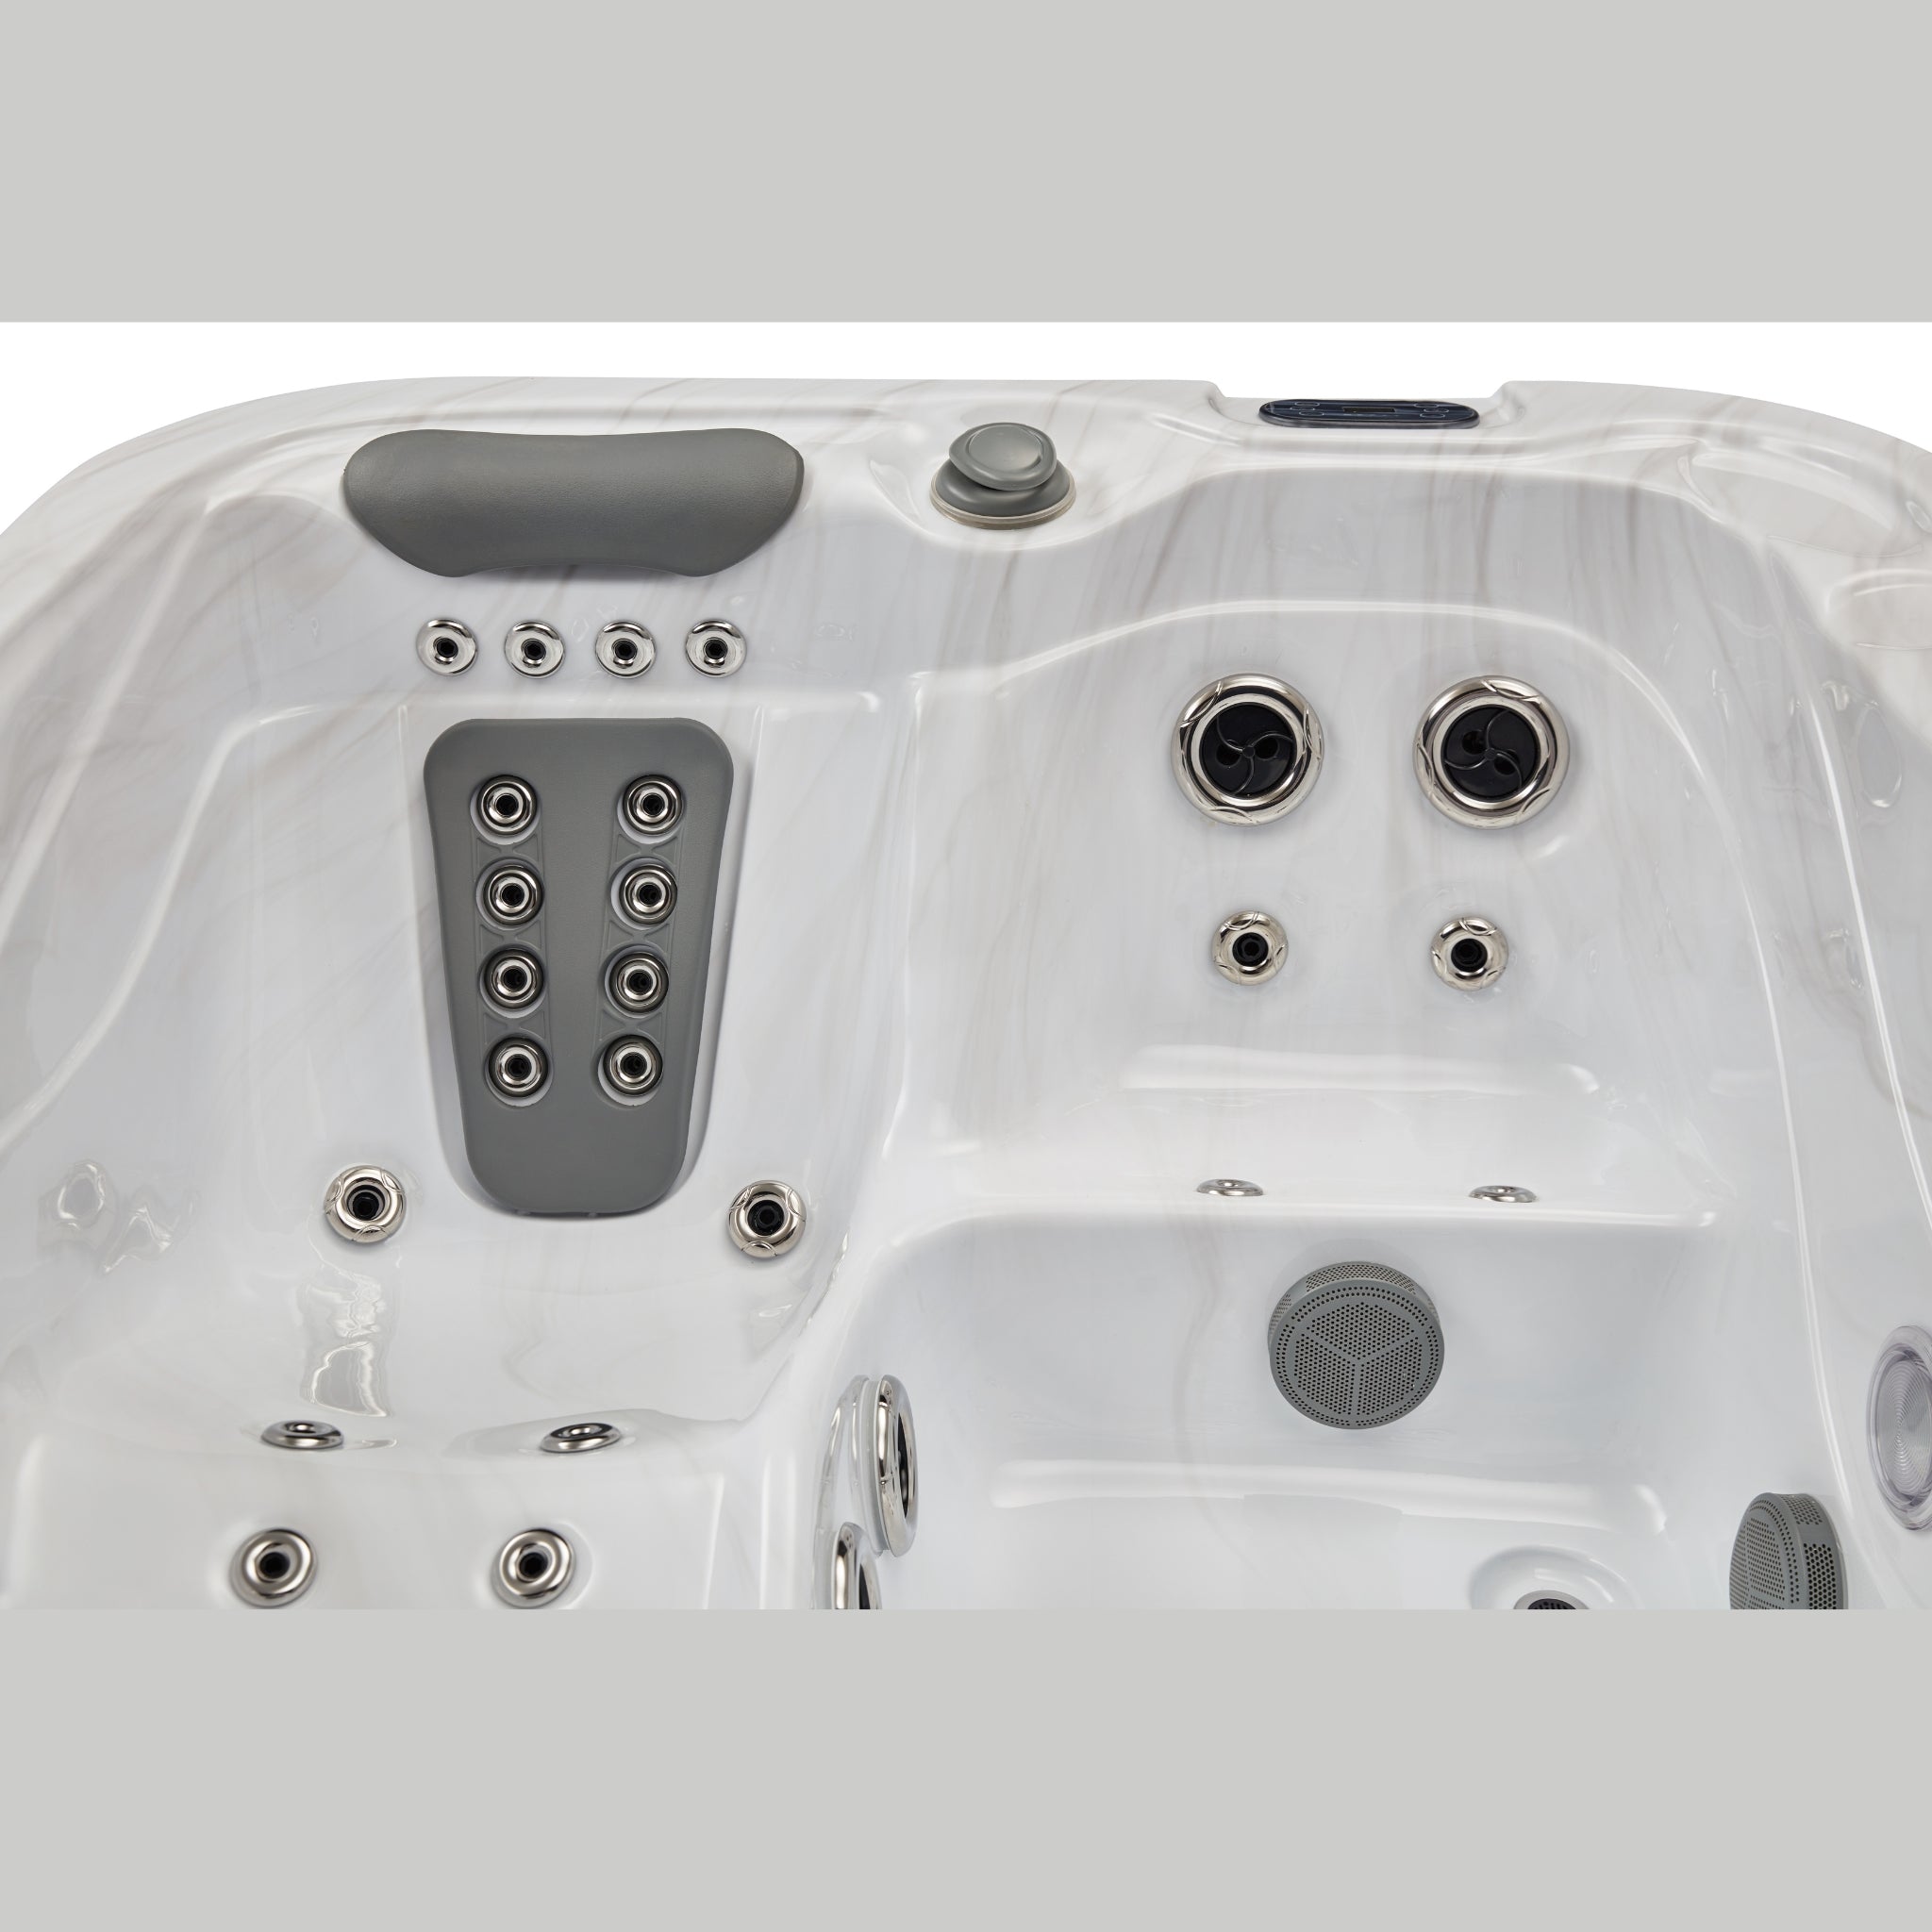 Casey 3-Person 47 Jet Lounger Hot Tub with Bluetooth